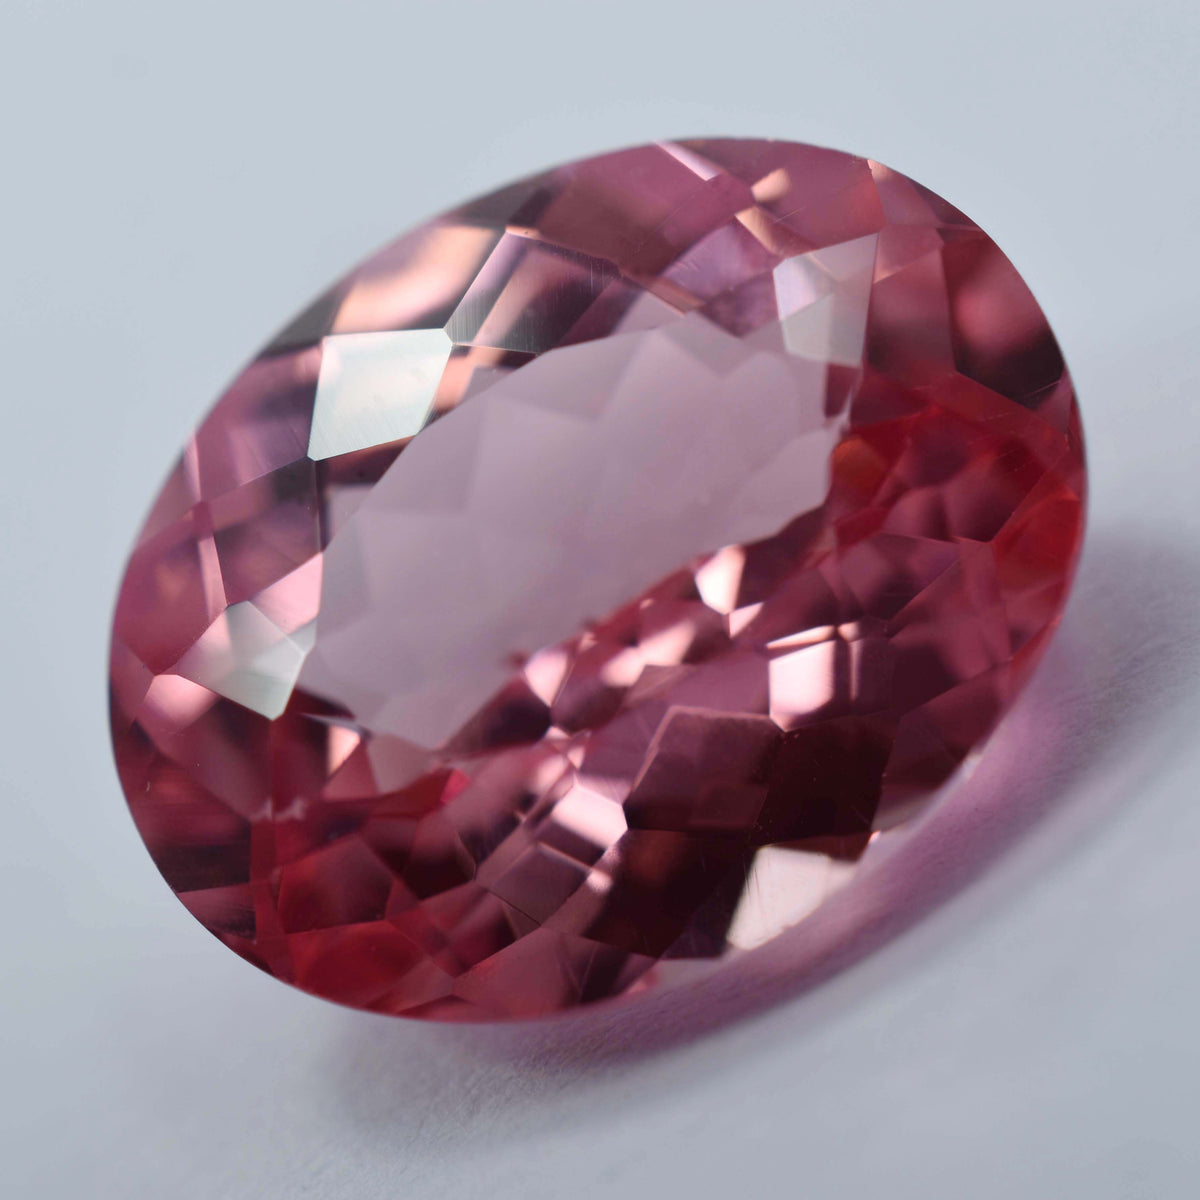 Certified Padparadscha Sapphire 9.65 Carat Oval Shape Natural Loose Gemstone Beautiful Sapphire Gem | Jwelery Making Gem | Sapphire Necklace | Best Price